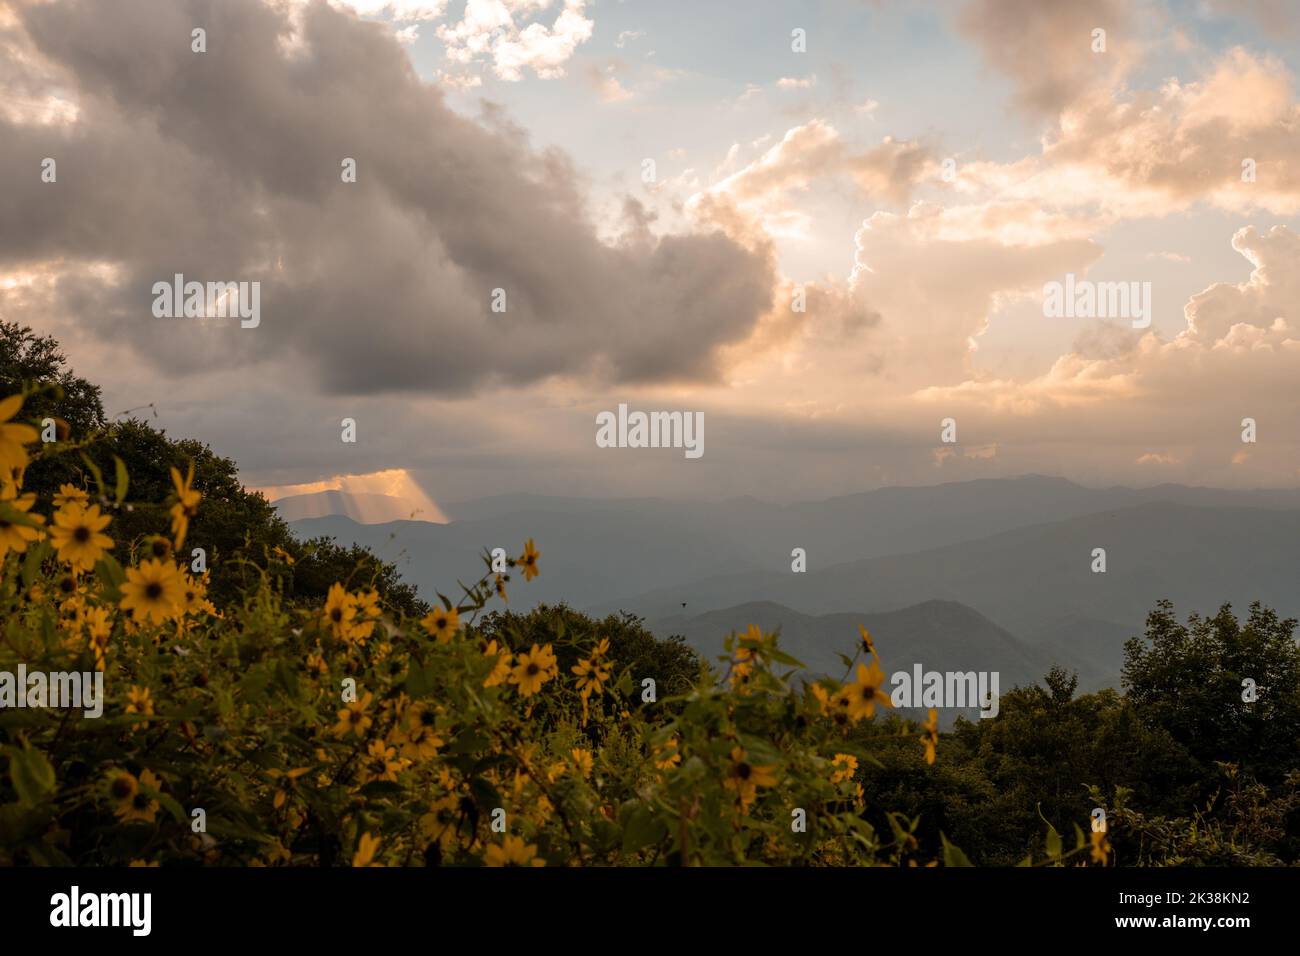 Shaft of Light Breaks Through Thick Clouds With Sunflowers In The Foreground along Balsam Mountain Road Stock Photo